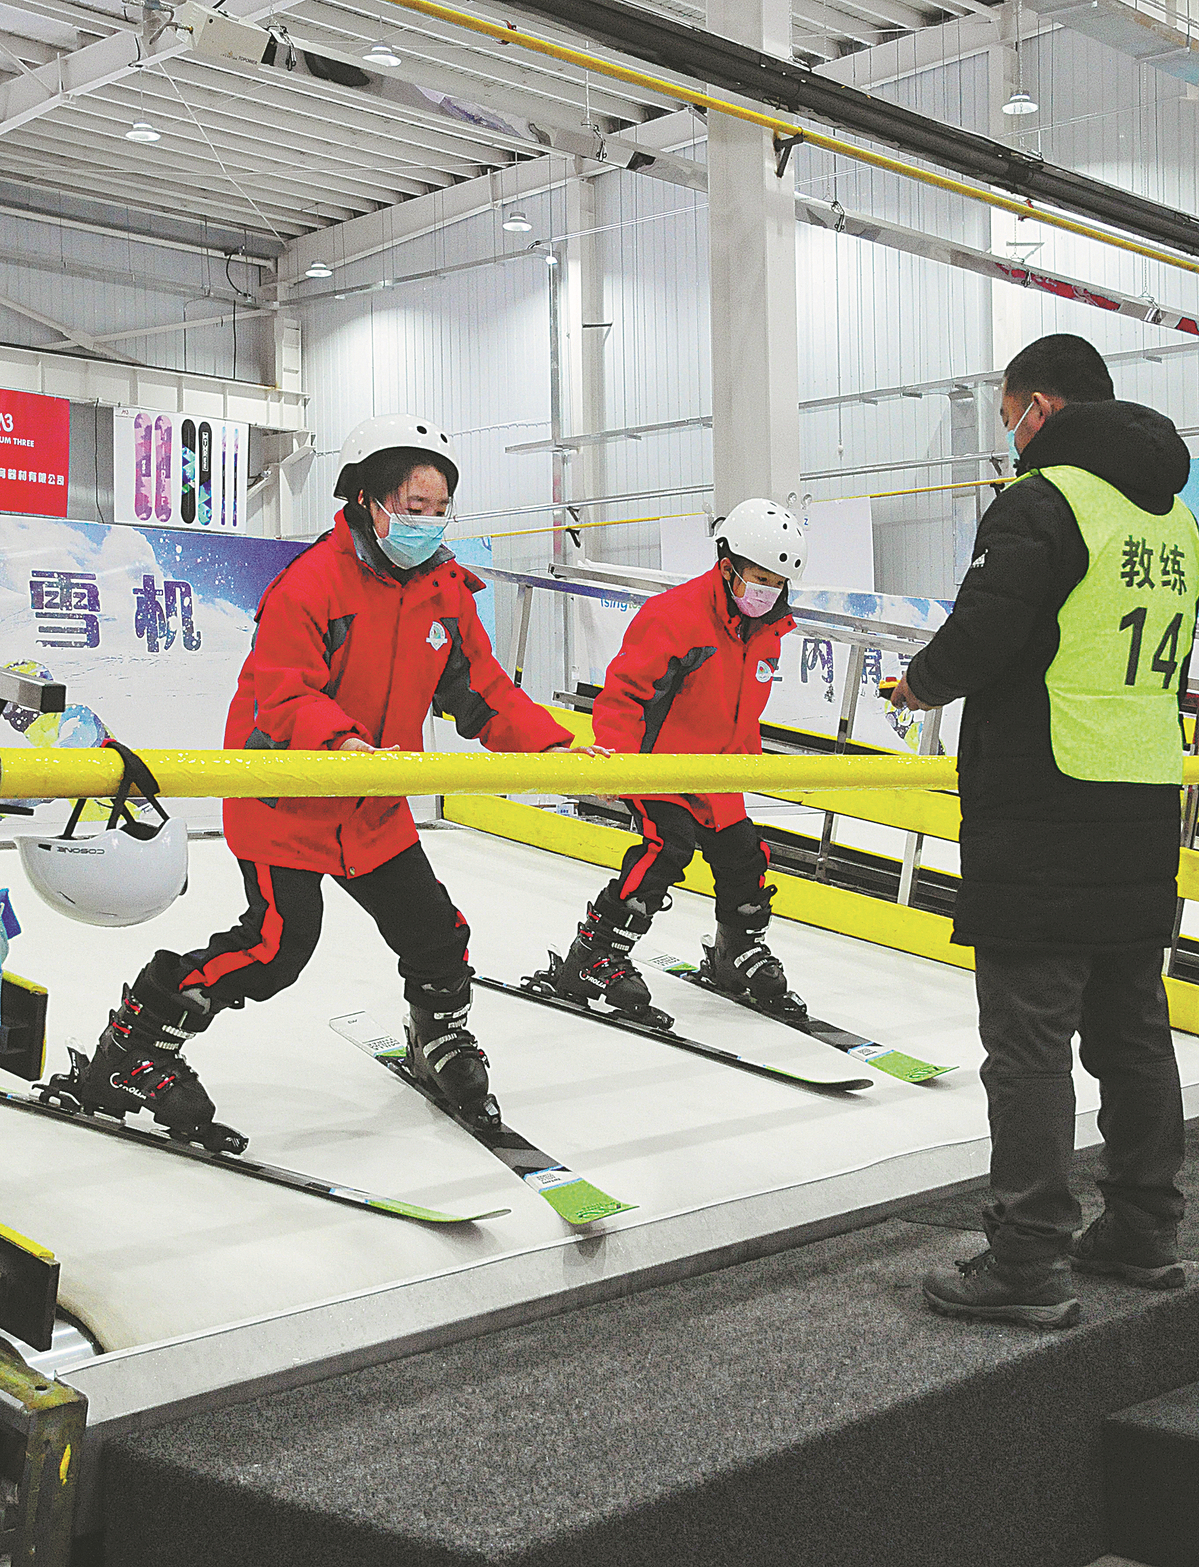 Winter Sports Promotion Continues in Post-Olympics Era